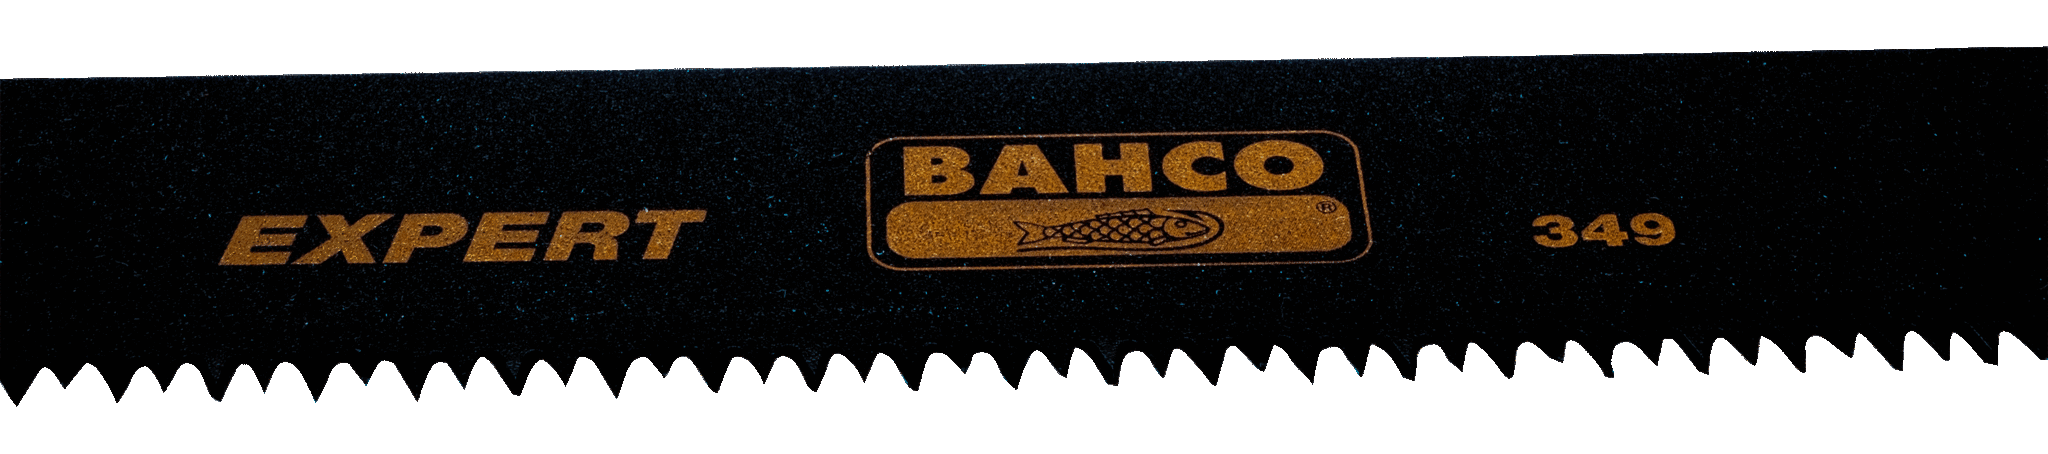 toothed handheld pruning saws with low friction blade 349 (bahco)